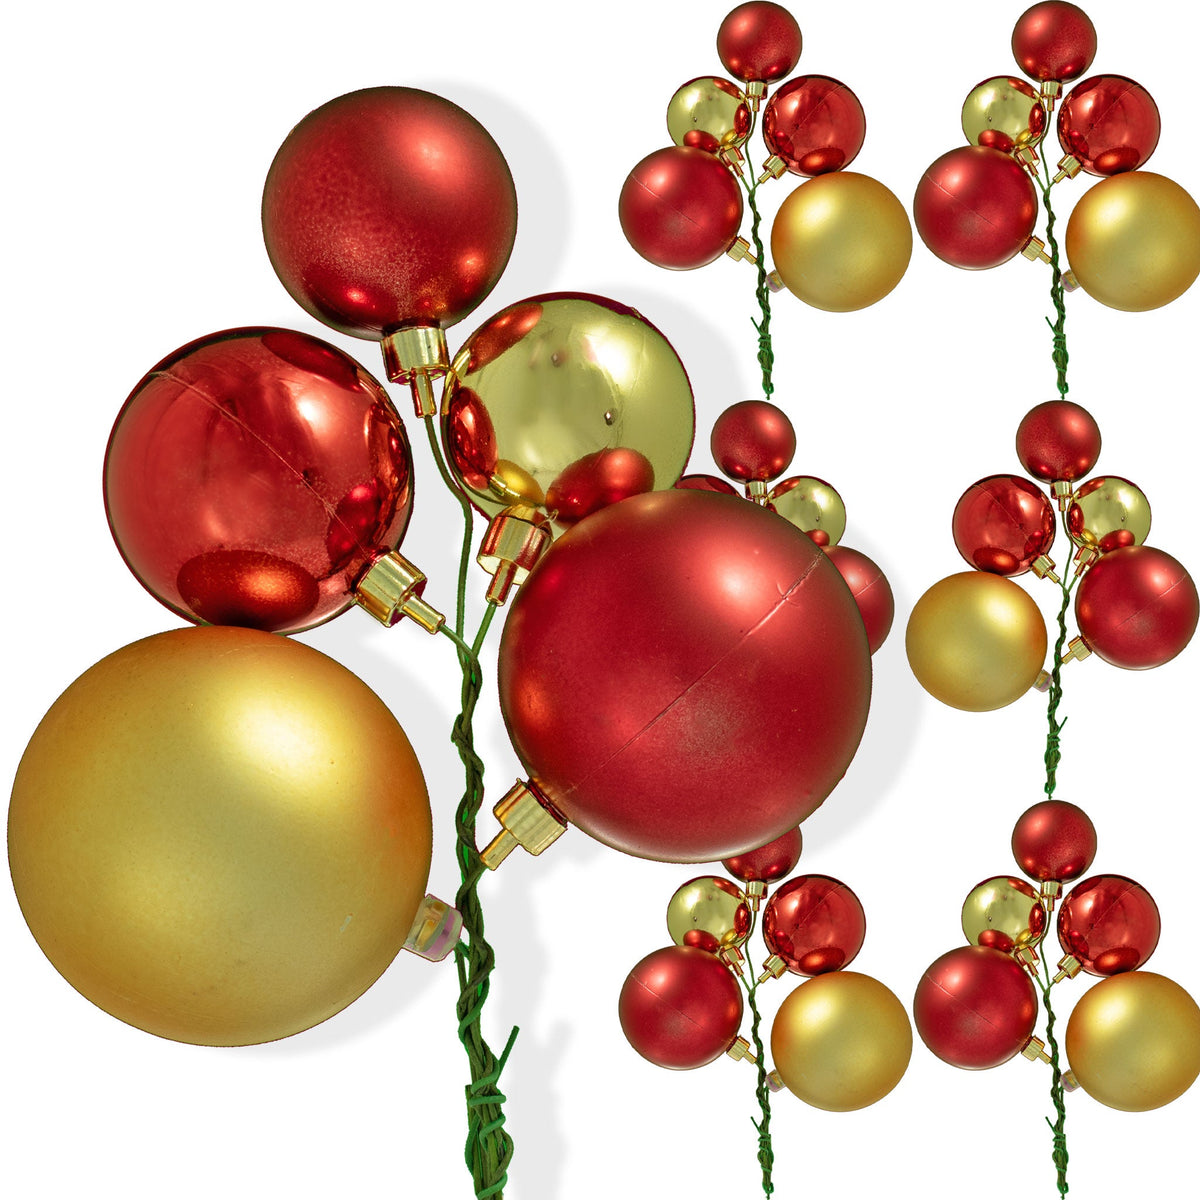 The Healdsburg Christmas Ball Ornament Cluster with Shiny Red & Gold Ball Ornament sold in sets of 6